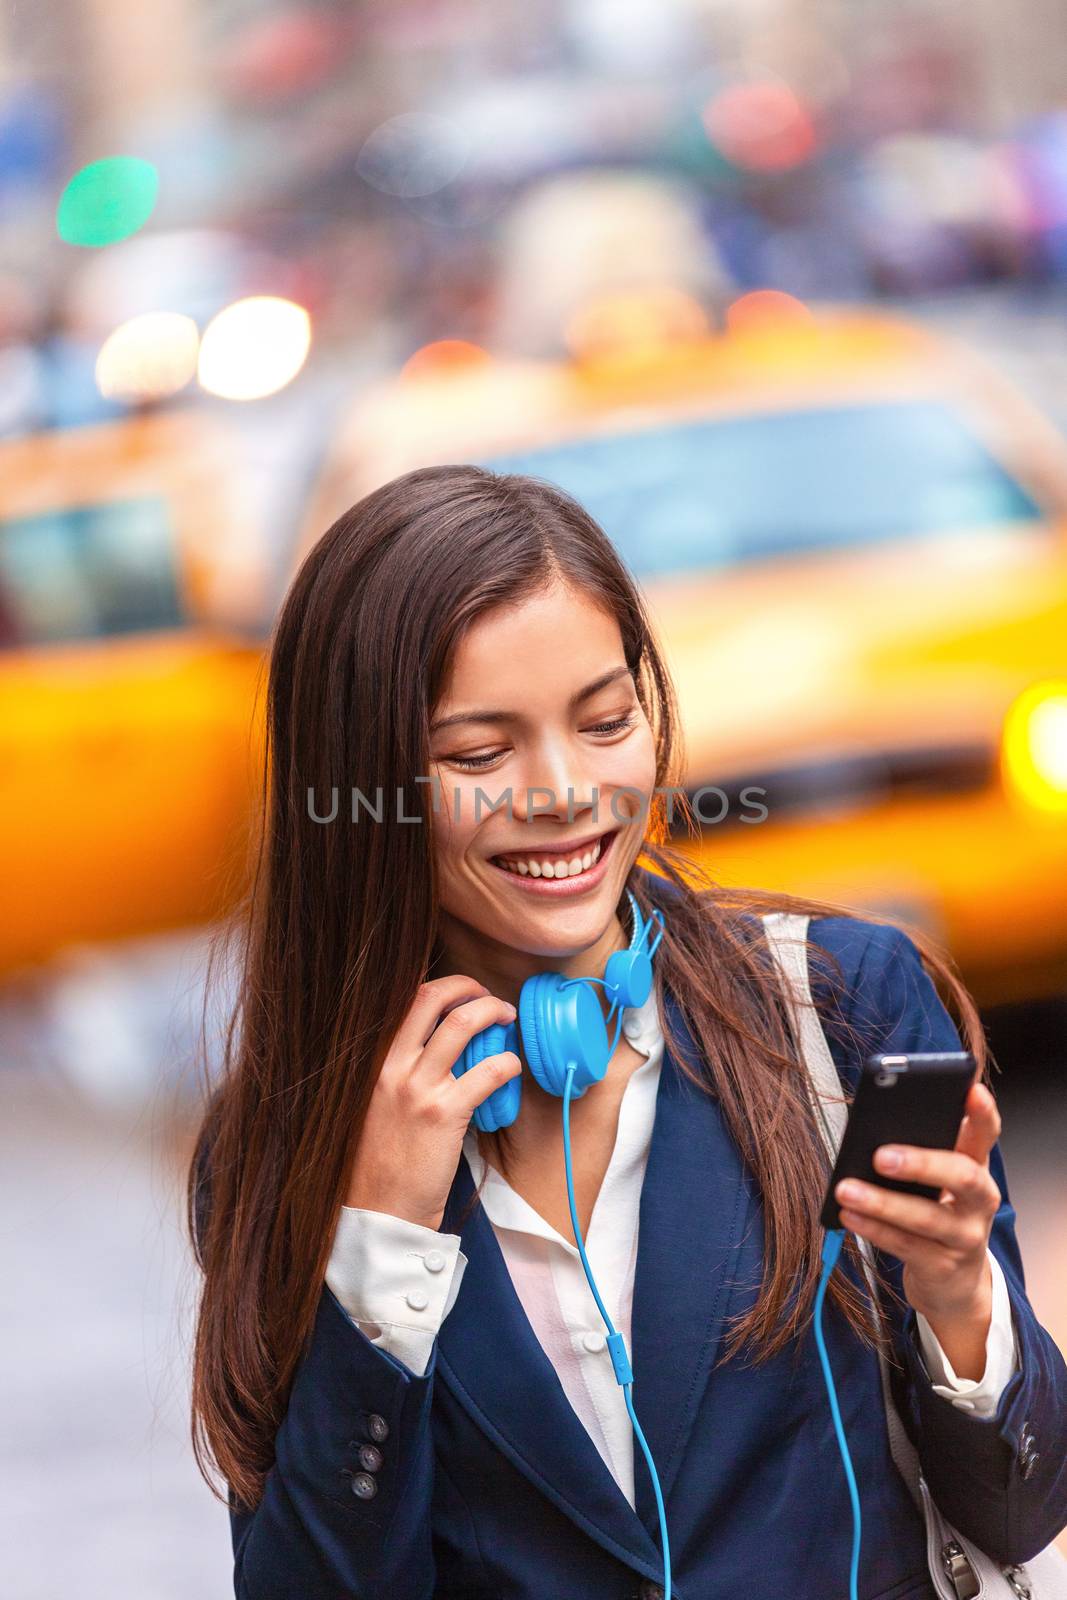 Headphones young woman walking in new york city using phone app listening to podcast or audiobook with earphones commuting from work. Asian girl businesswoman using cellphone.